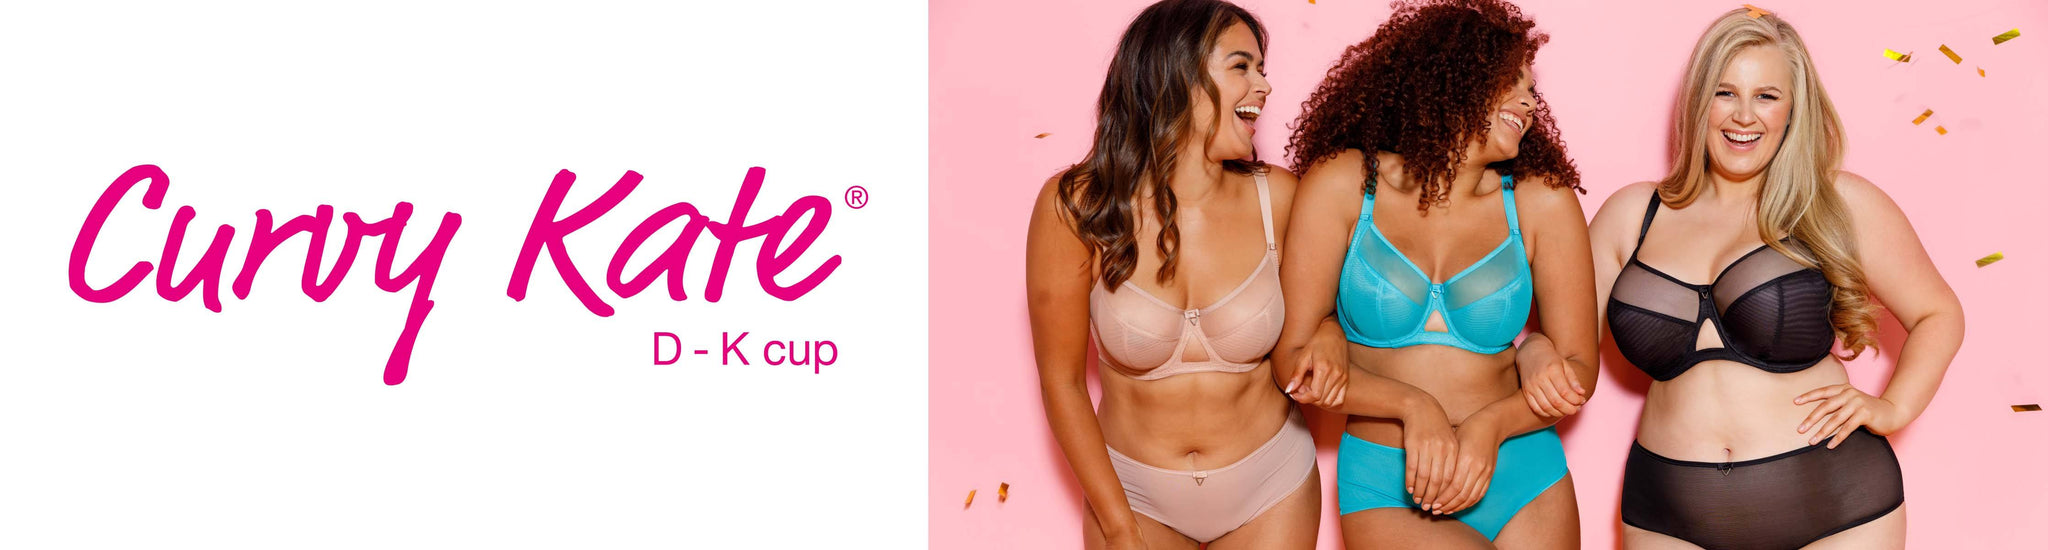 Curvy Kate Bras - Beautiful Bras Designed for Comfort & Support Page 2